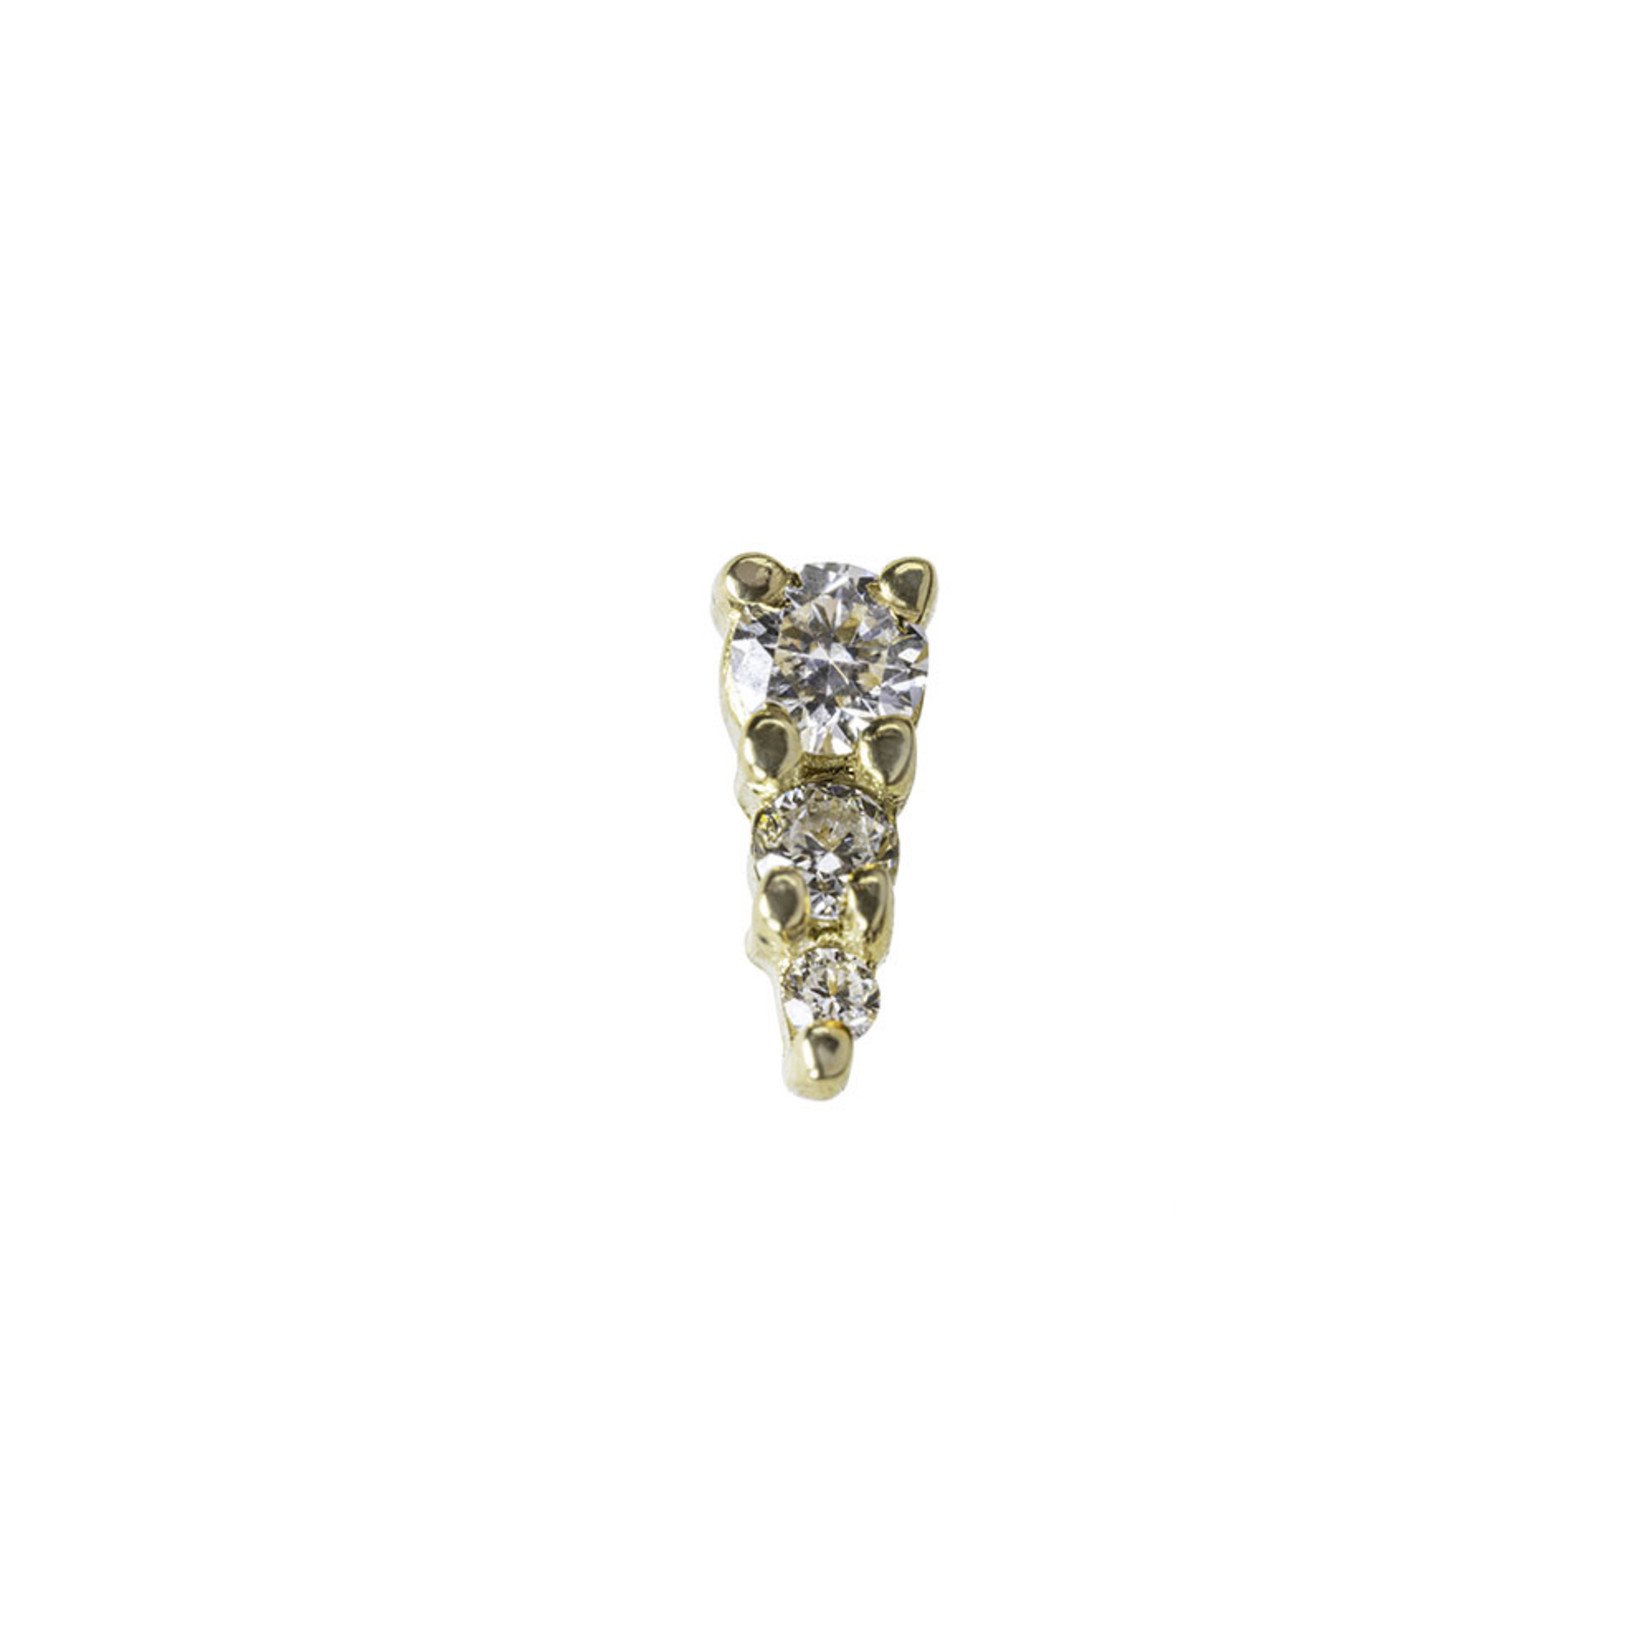 BVLA BVLA yellow gold "Jeanie 3" press fit end with 2.0, 1.5, and 1.0 VS1 Diamond